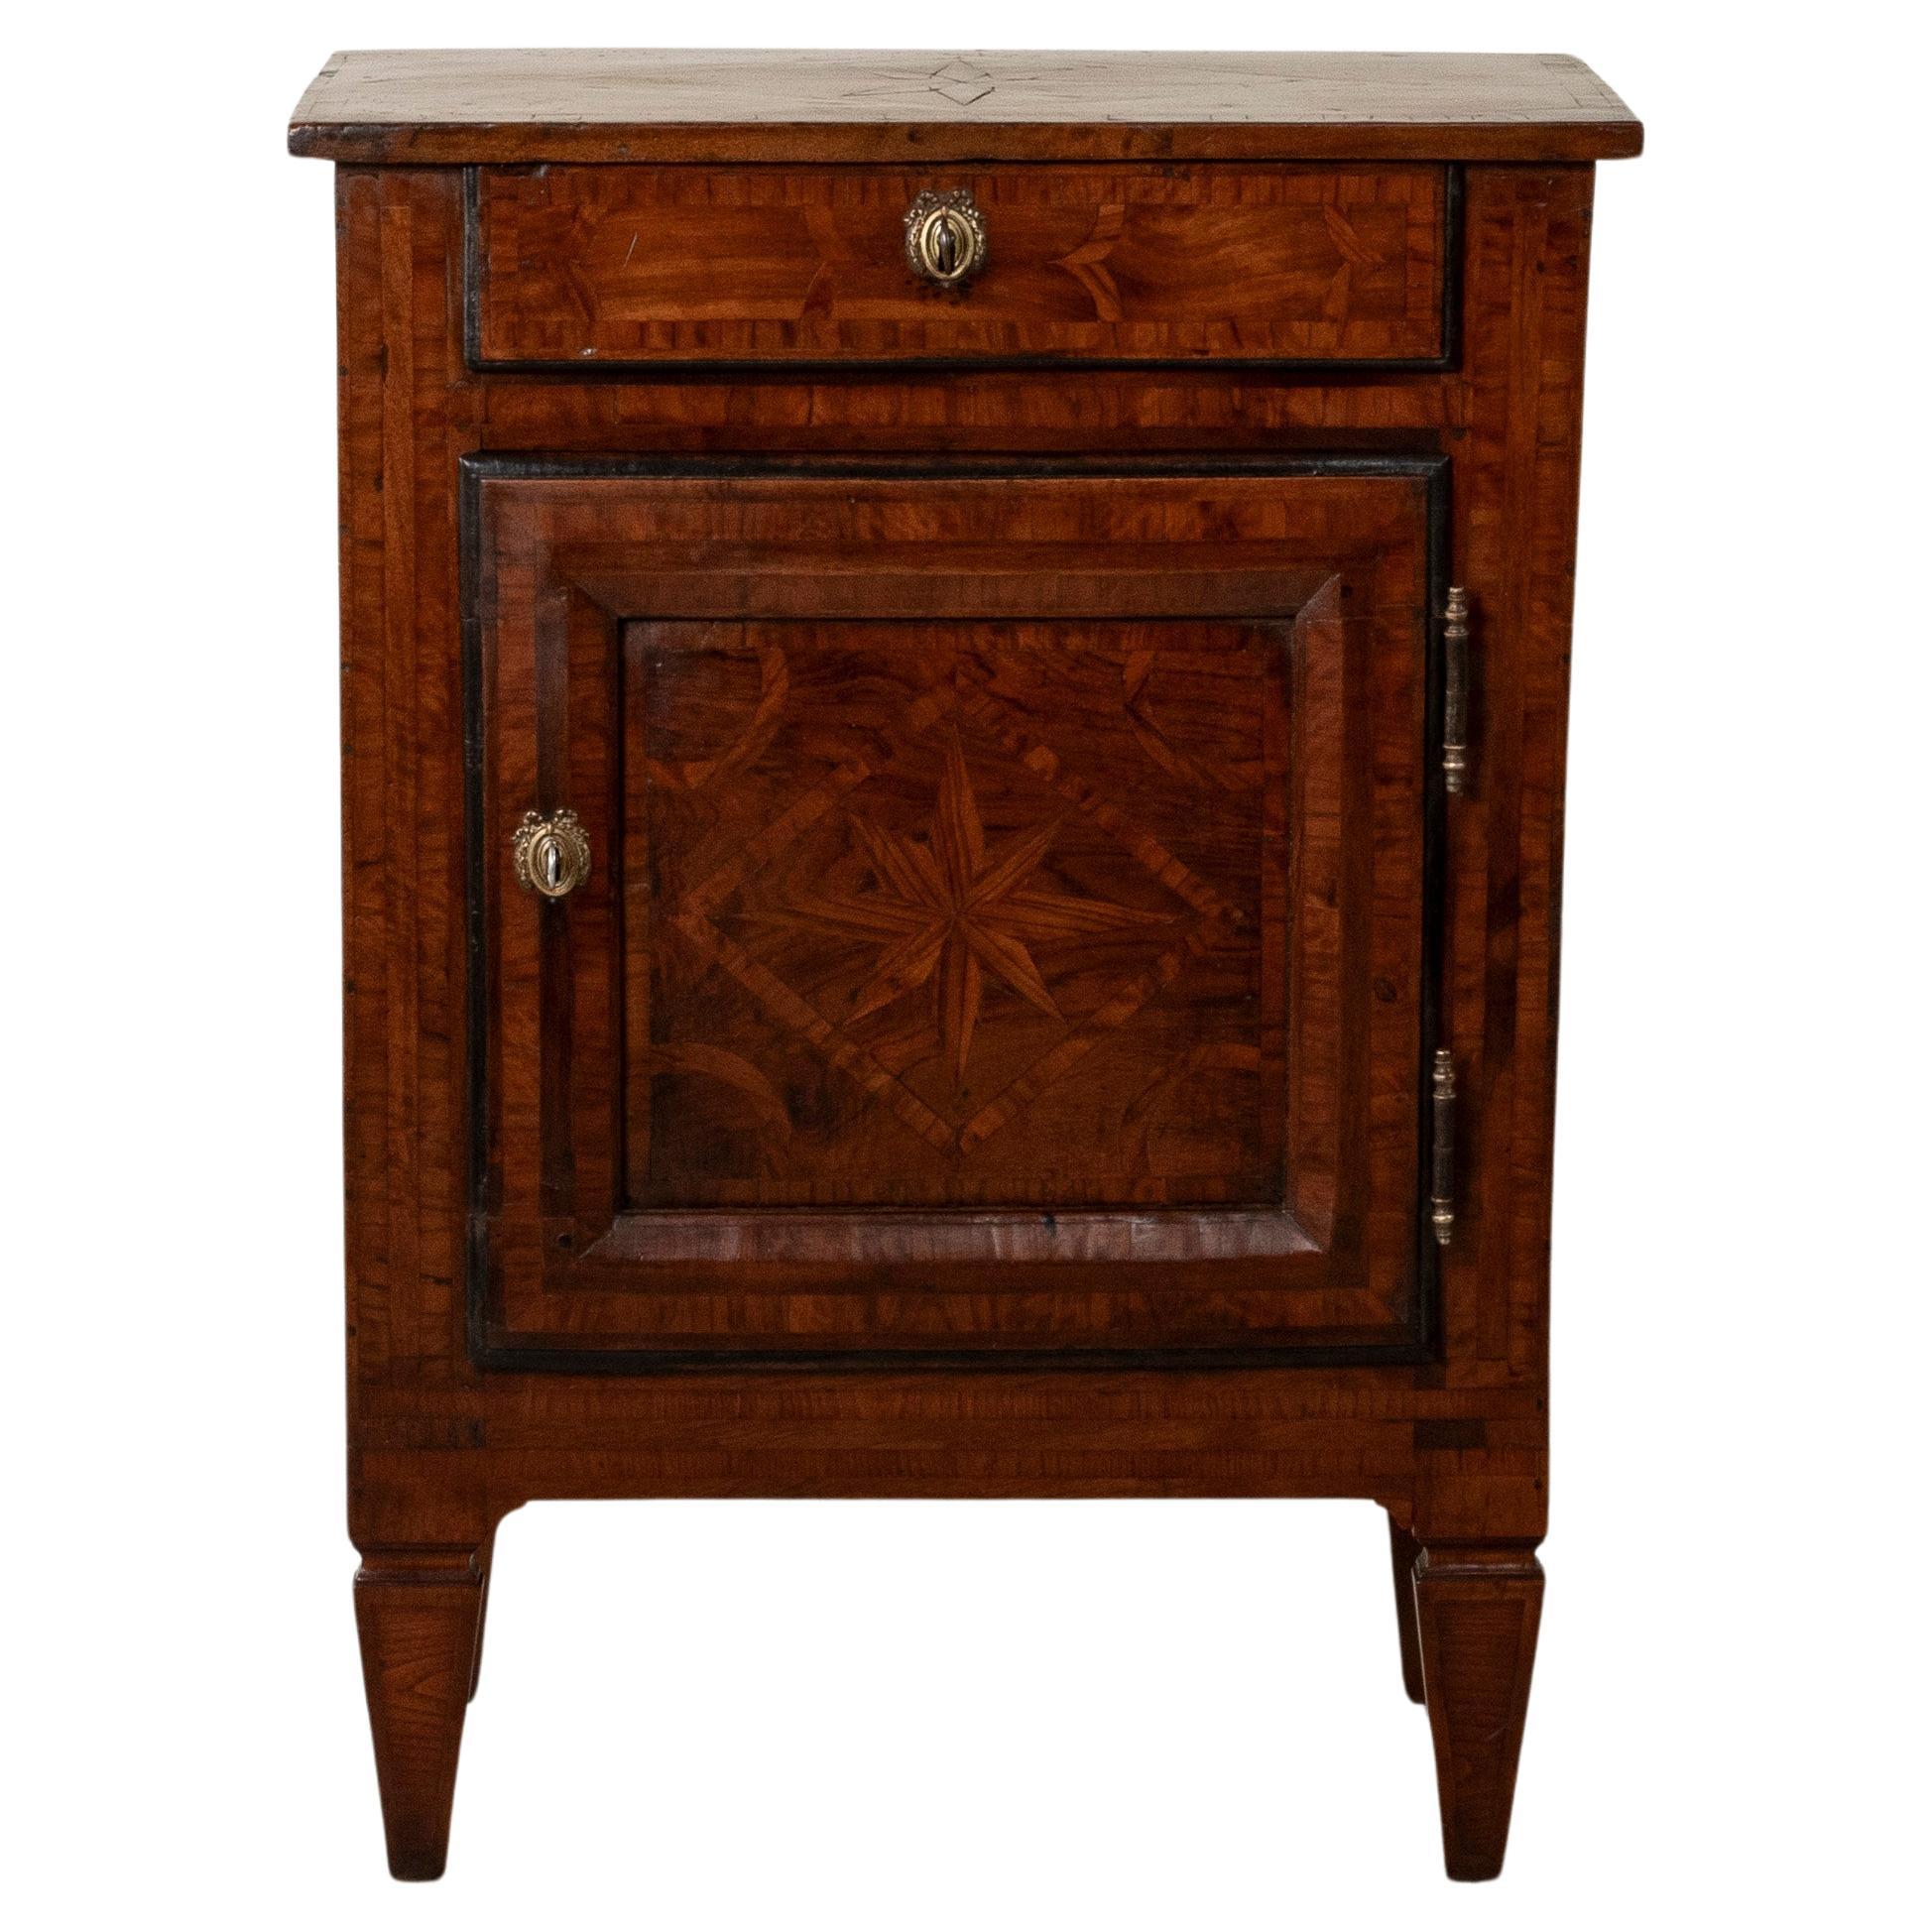 18th Century French Regency Period Walnut and Rosewood Marquetry Cabinet